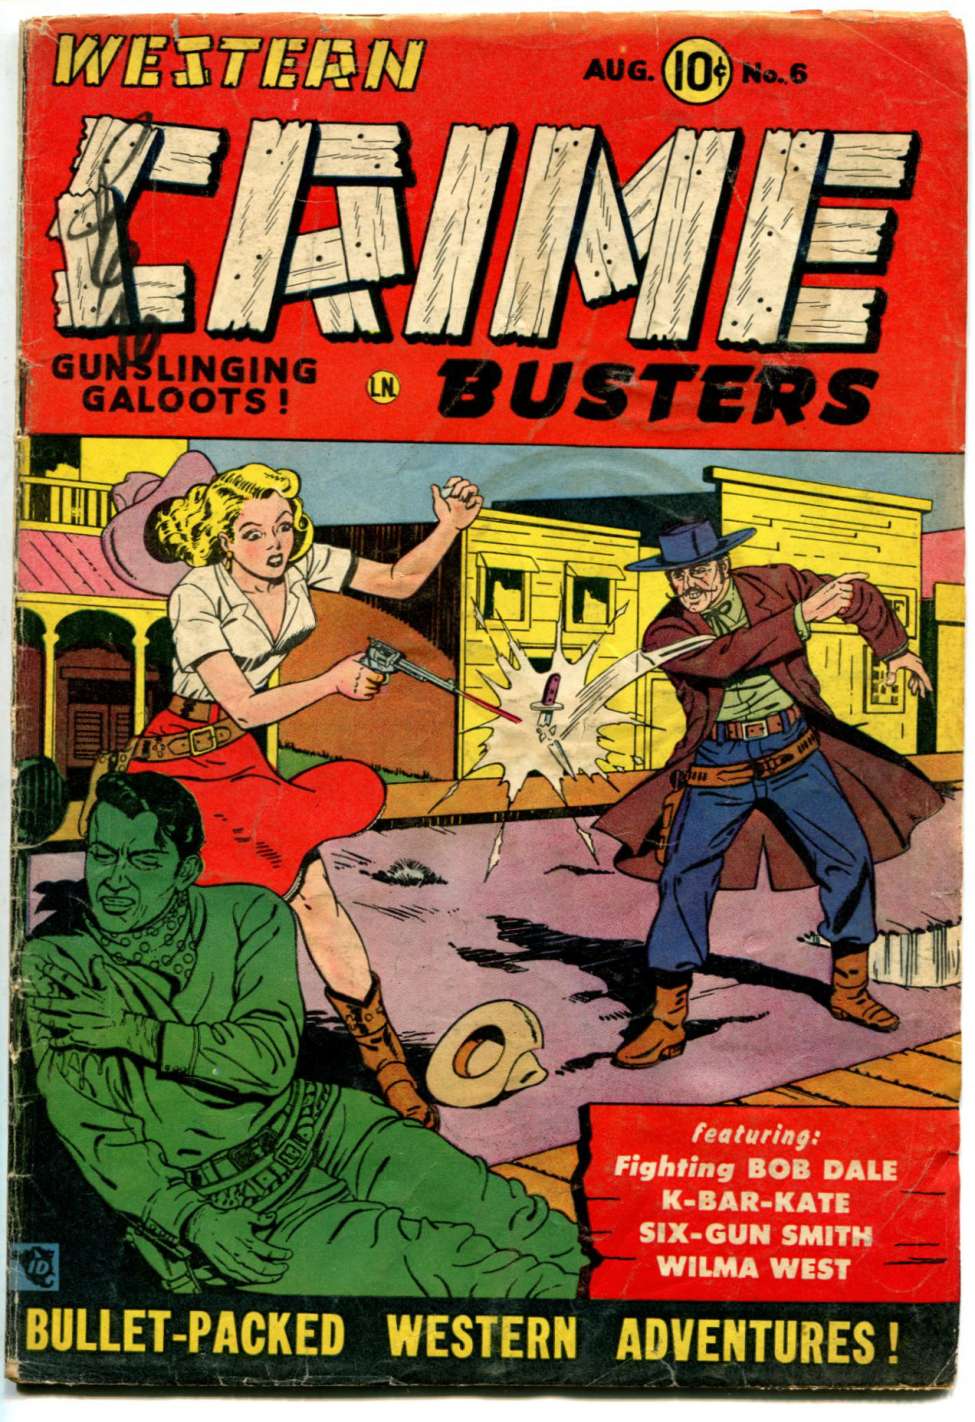 Book Cover For Western Crime Busters 6